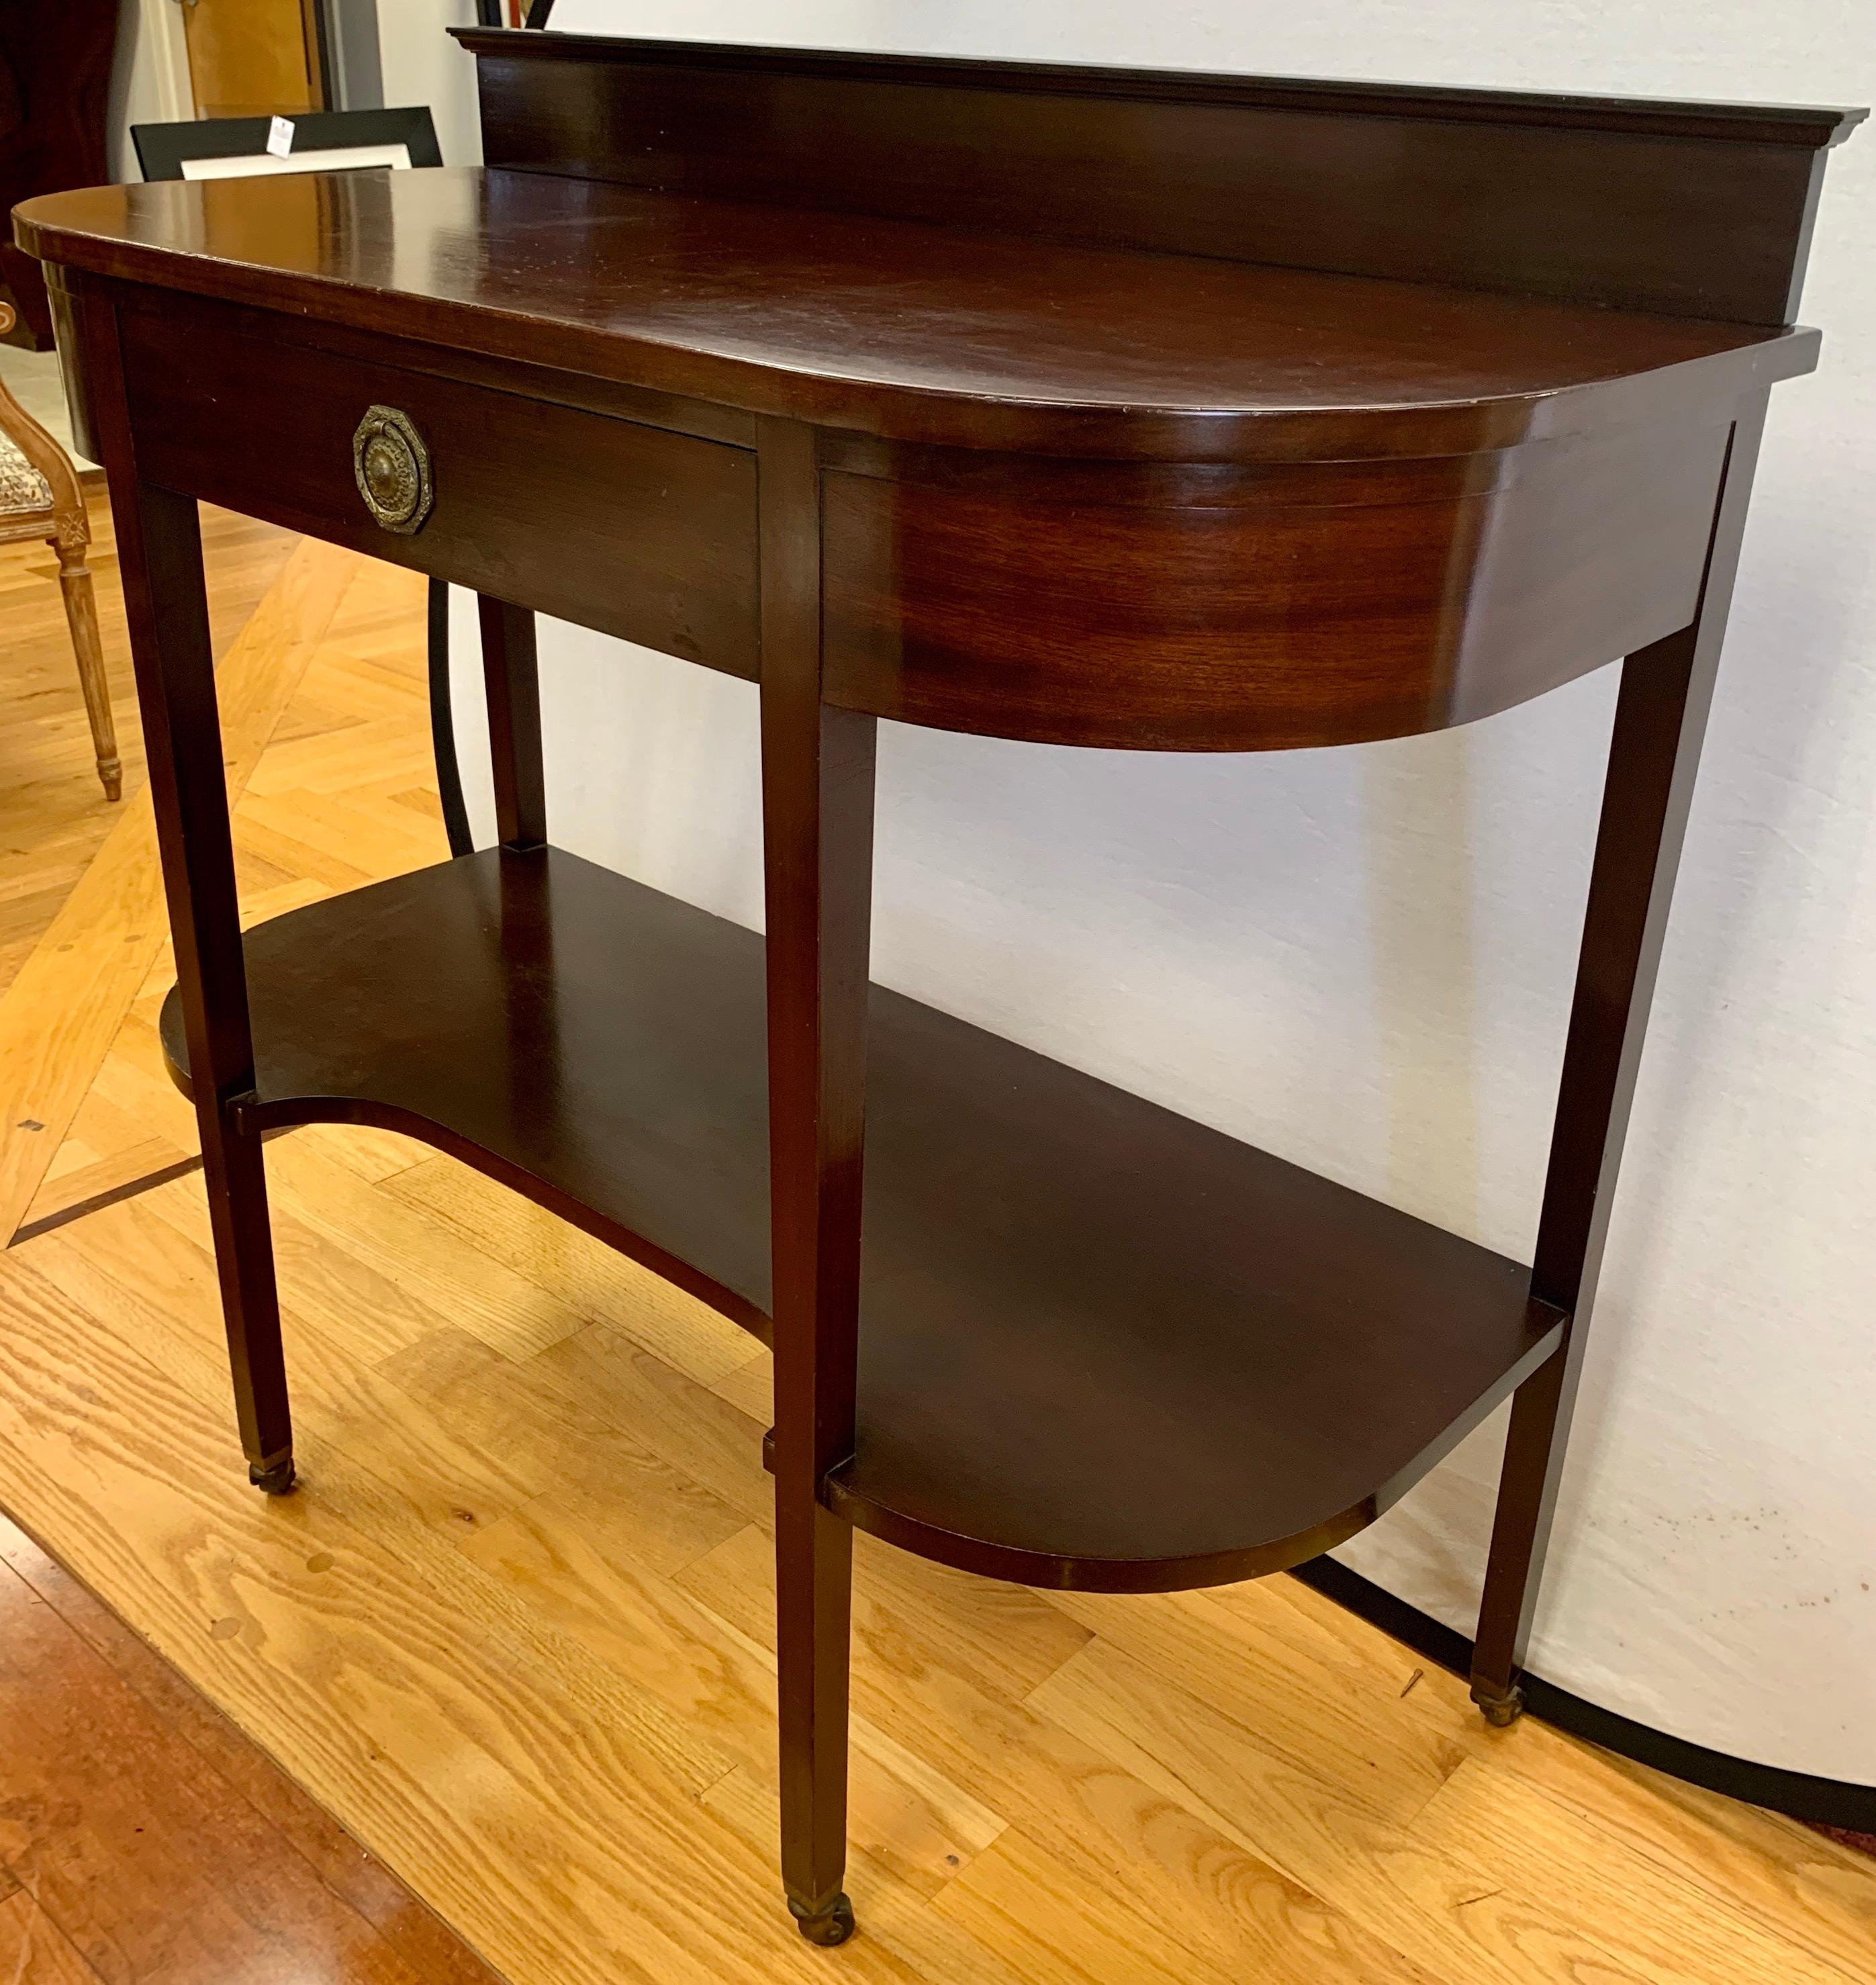 Vintage mahogany curved tiered console buffet featuring one-drawer. Sold through Boston's Paine Furniture. Great lines and better scale.